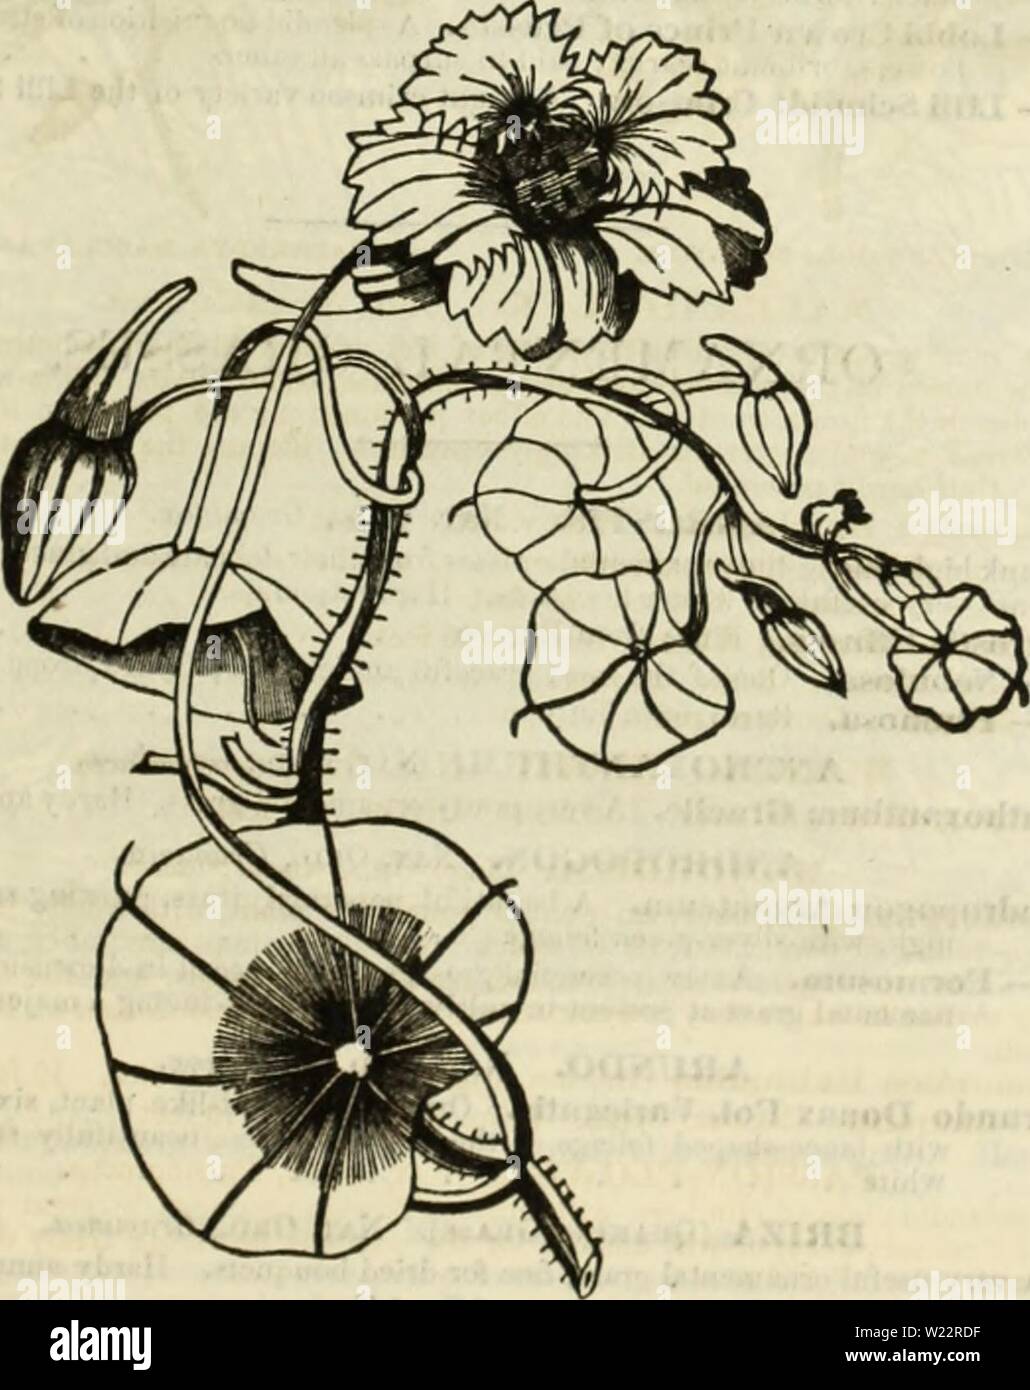 Archive image from page 108 of Curtis, Cobb & Washburn's amateur. Curtis, Cobb & Washburn's amateur cultivator's guide to the flower and kitchen garden for 1878  curtiscobbwashbu1878curt Year: 1878  MATEUK CULTIVATOR'S §UIDE. I PBICK. PHASEOLUS (ScAULET-RuNSEH Brans). Nat. Ord., Leguminoaa. This is a popular climbing nniiunl, with spikes of showy scarlet flowers, and a /ariety with white flowers. They are extensively grown to cover arbors, walla, oj to form screens, for which purpose they are admirably adapted on account of their vigorous and rapid growth. Hardy annuals. 841 Fhaseolus Coccinea Stock Photo